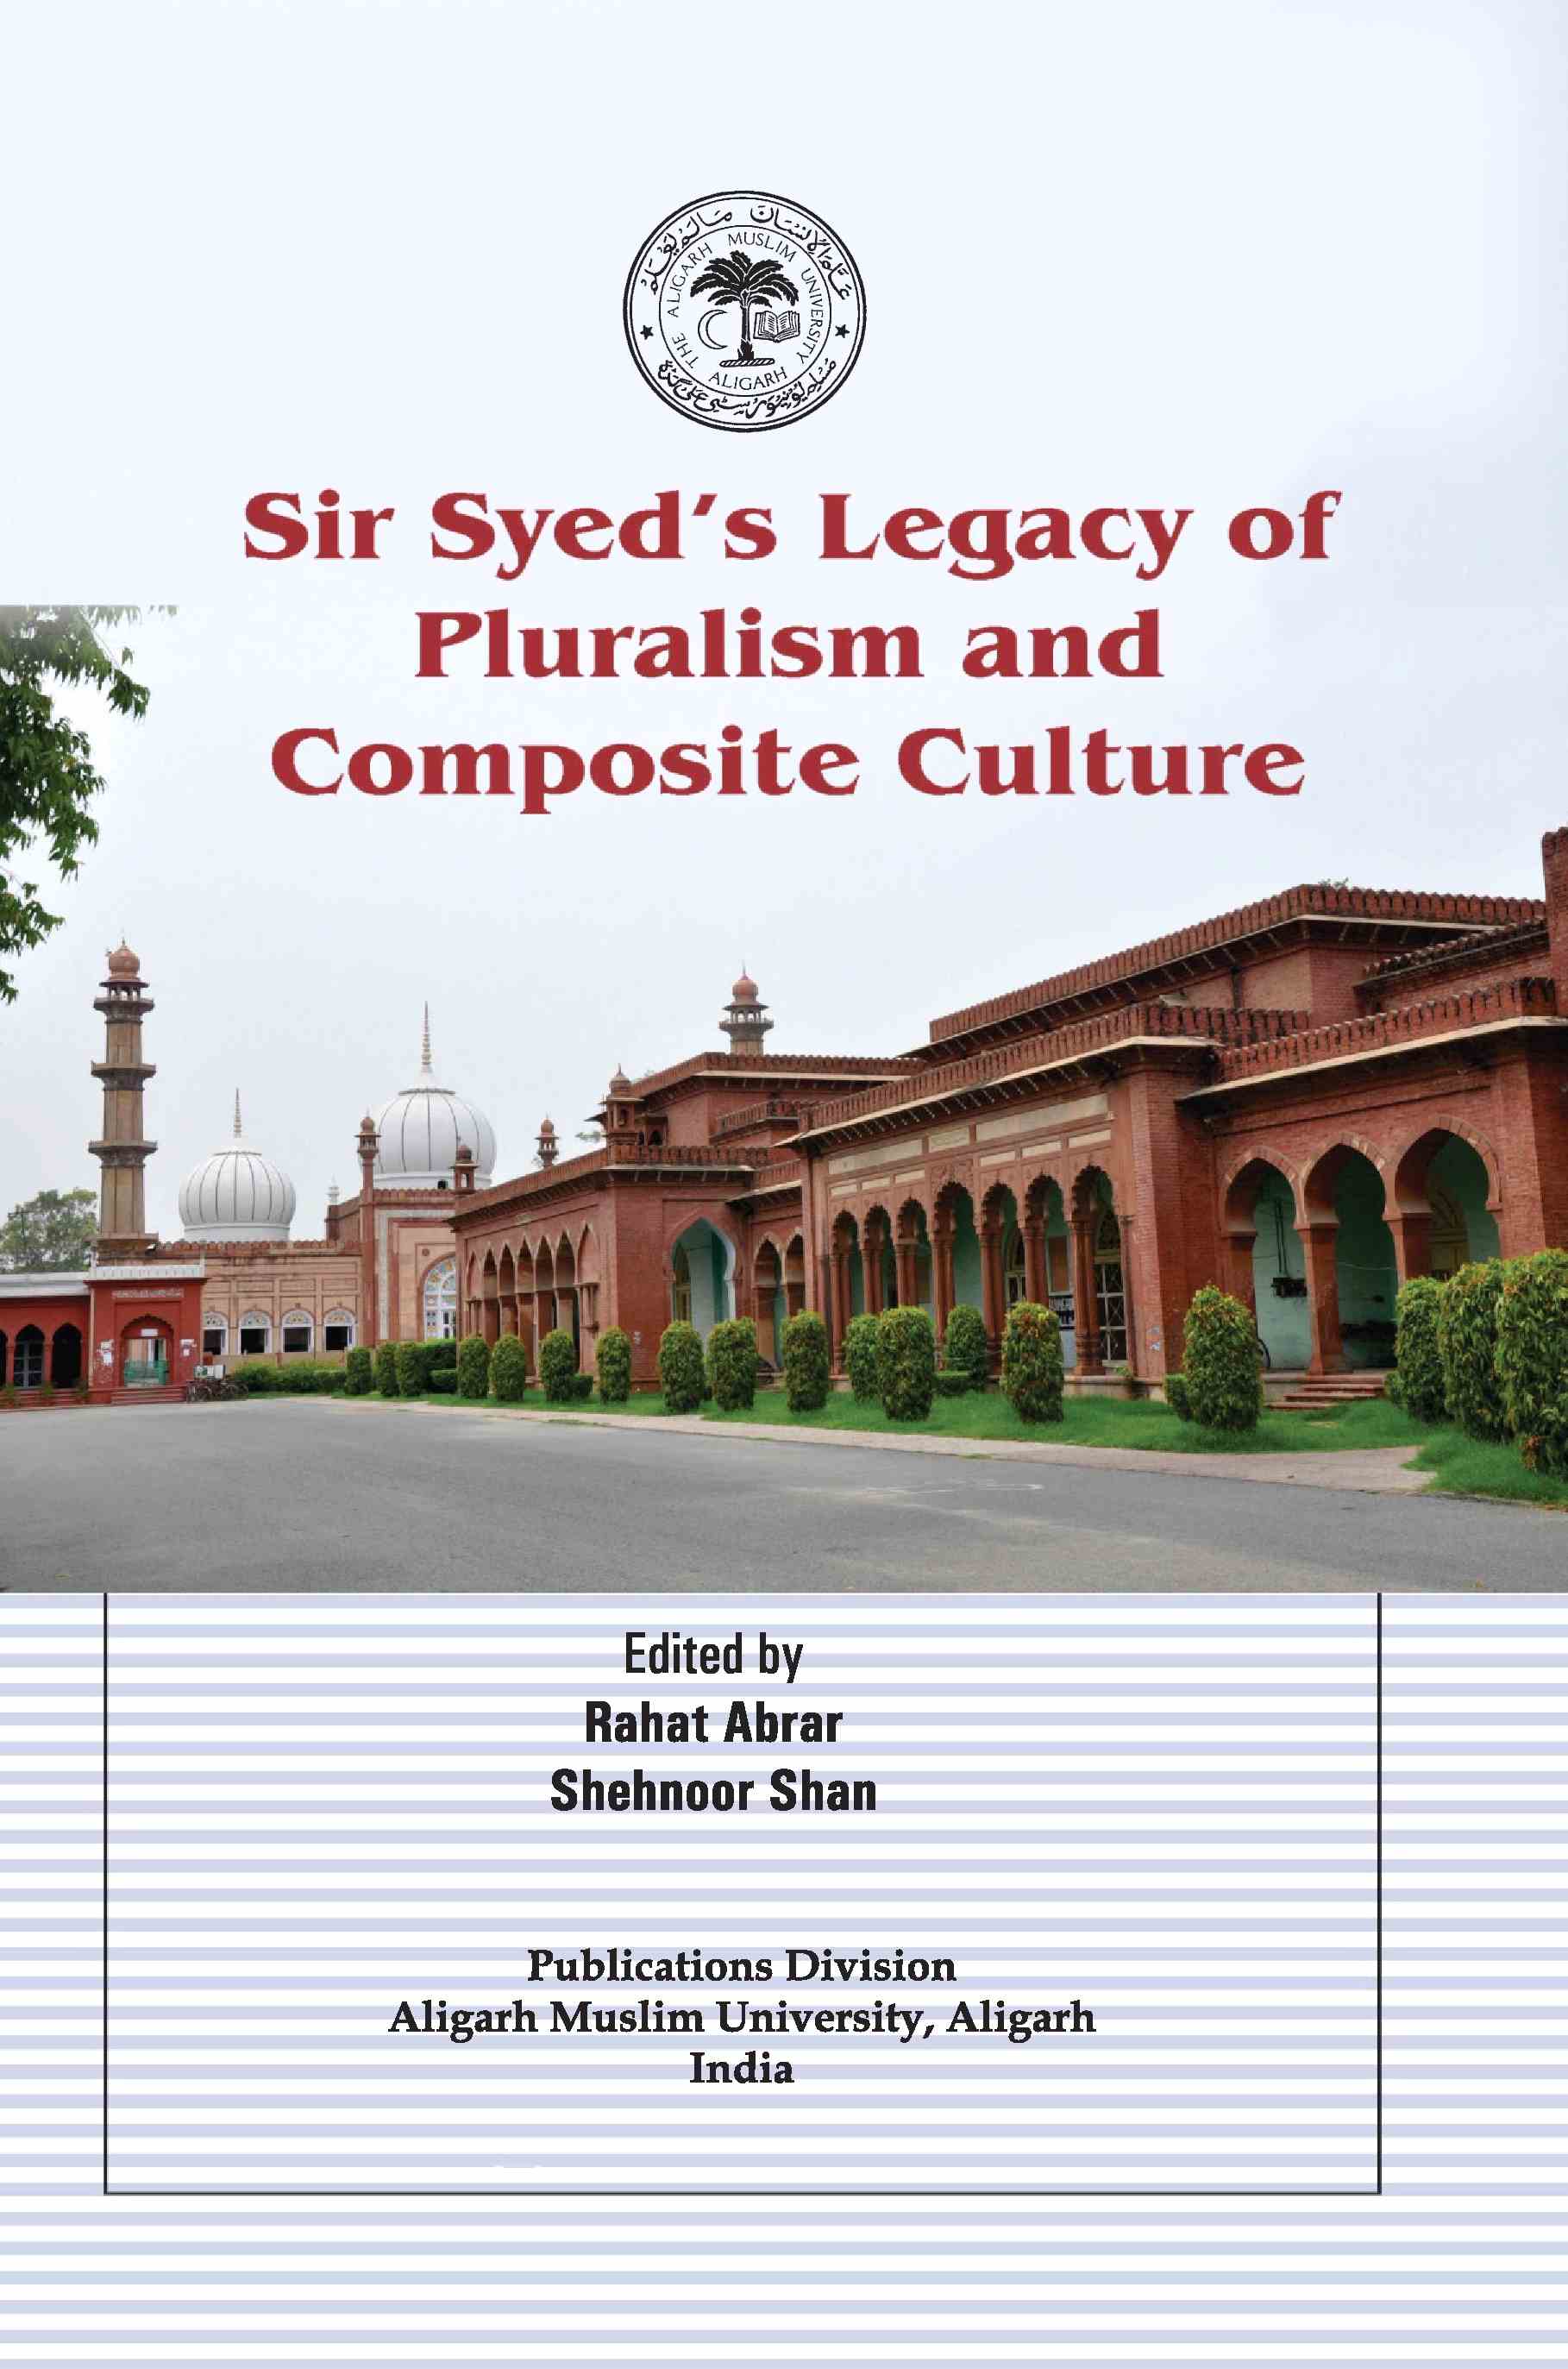 Sir Syed’s Legacy of Pluralism and Composite Culture